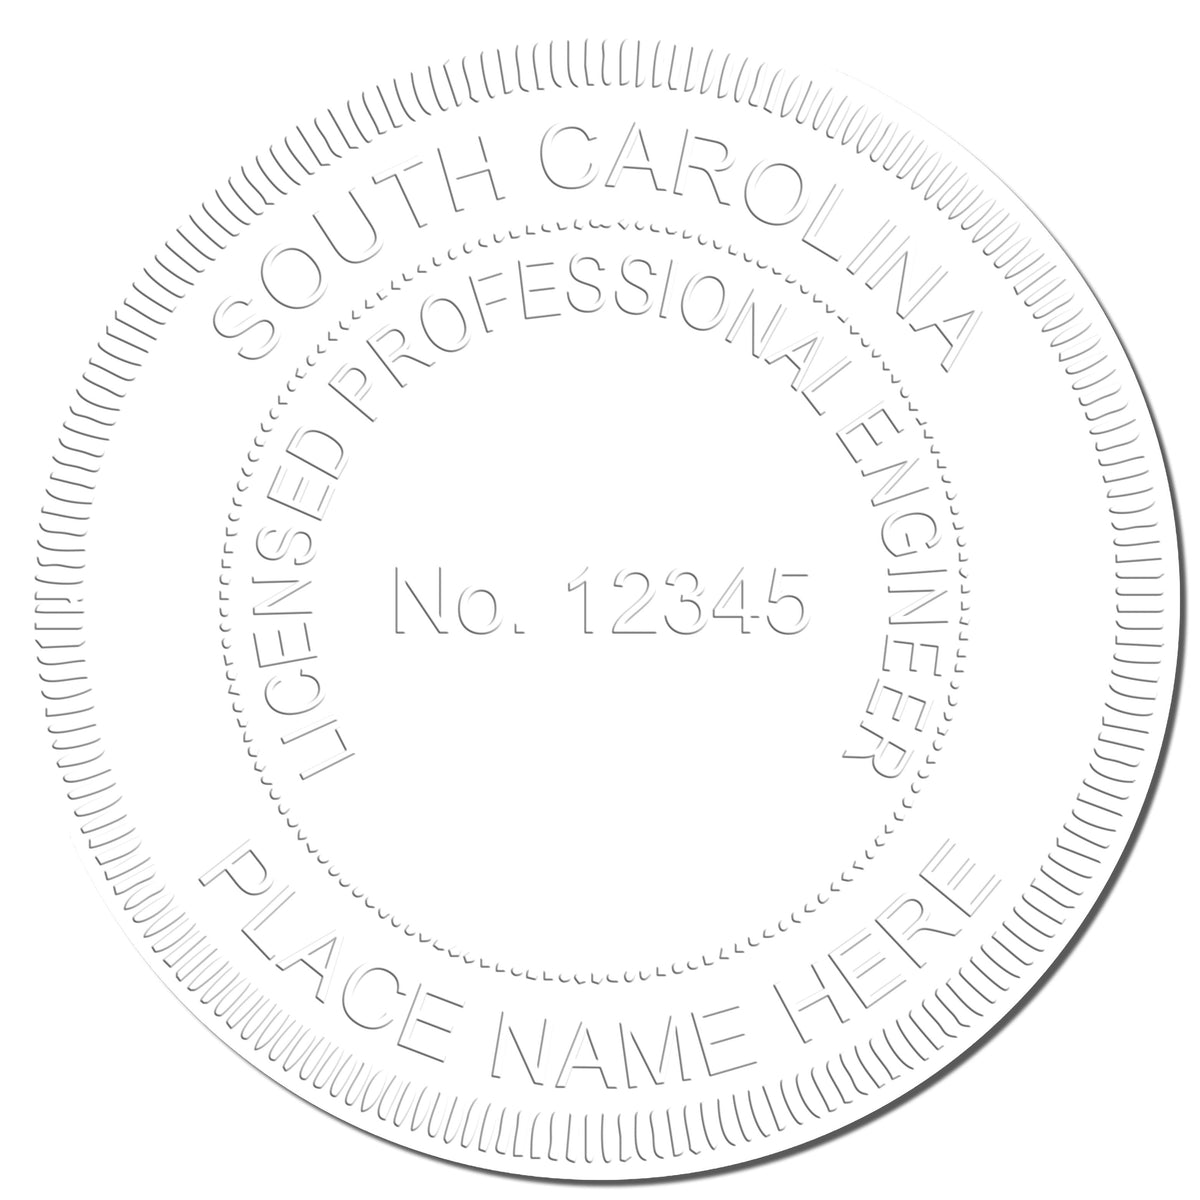 This paper is stamped with a sample imprint of the Hybrid South Carolina Engineer Seal, signifying its quality and reliability.